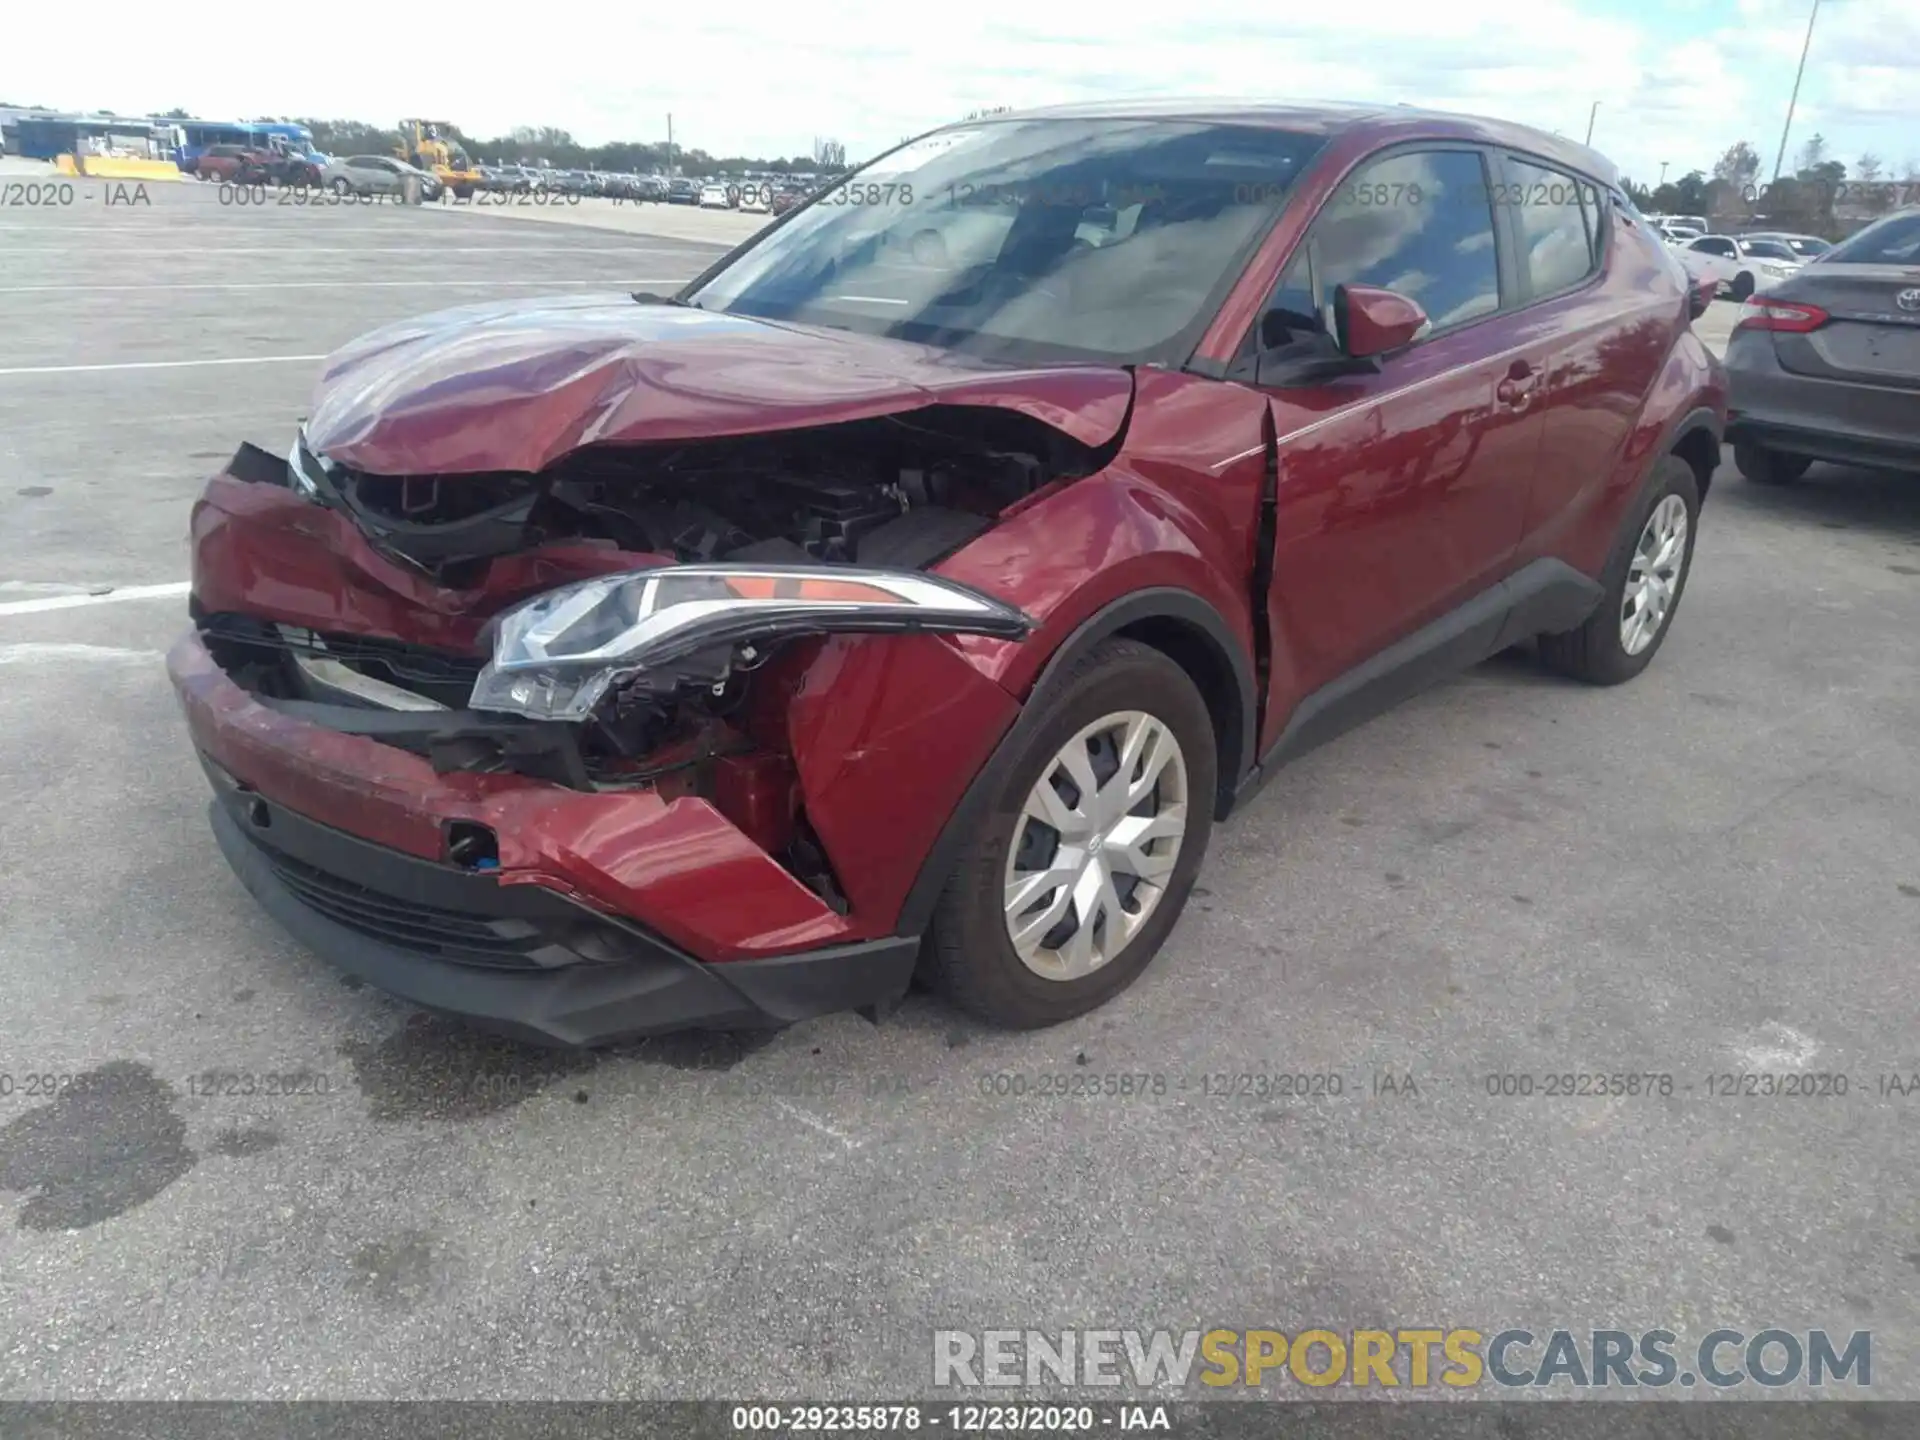 2 Photograph of a damaged car NMTKHMBXXKR087732 TOYOTA C-HR 2019